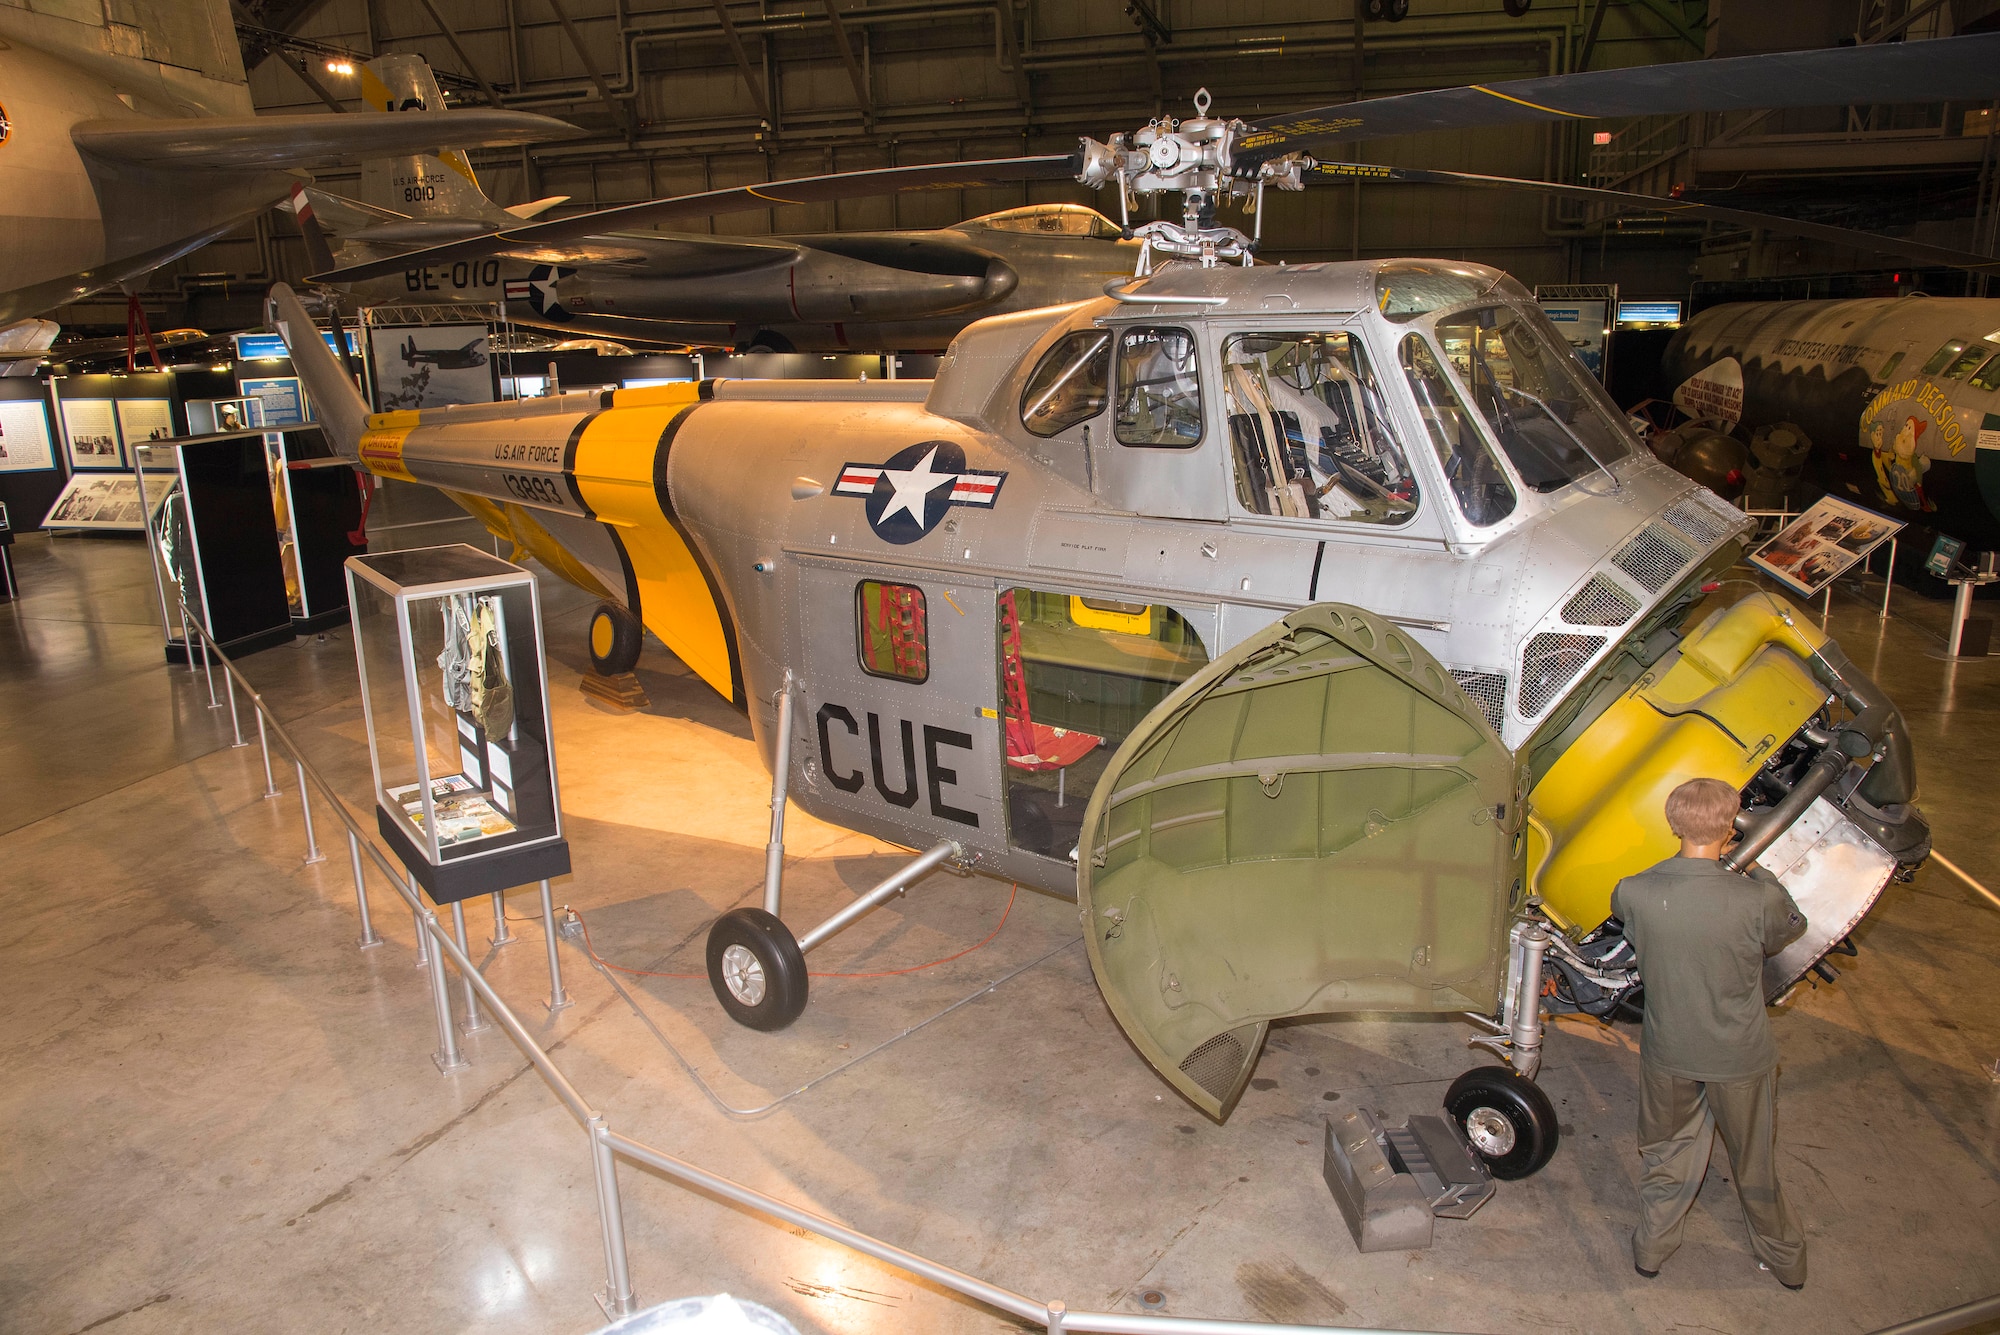 Sikorsky UH-19B Chickasaw in the Korean War Gallery at the National Museum of the United States Air Force. (U.S. Air Force photo by Ken LaRock)